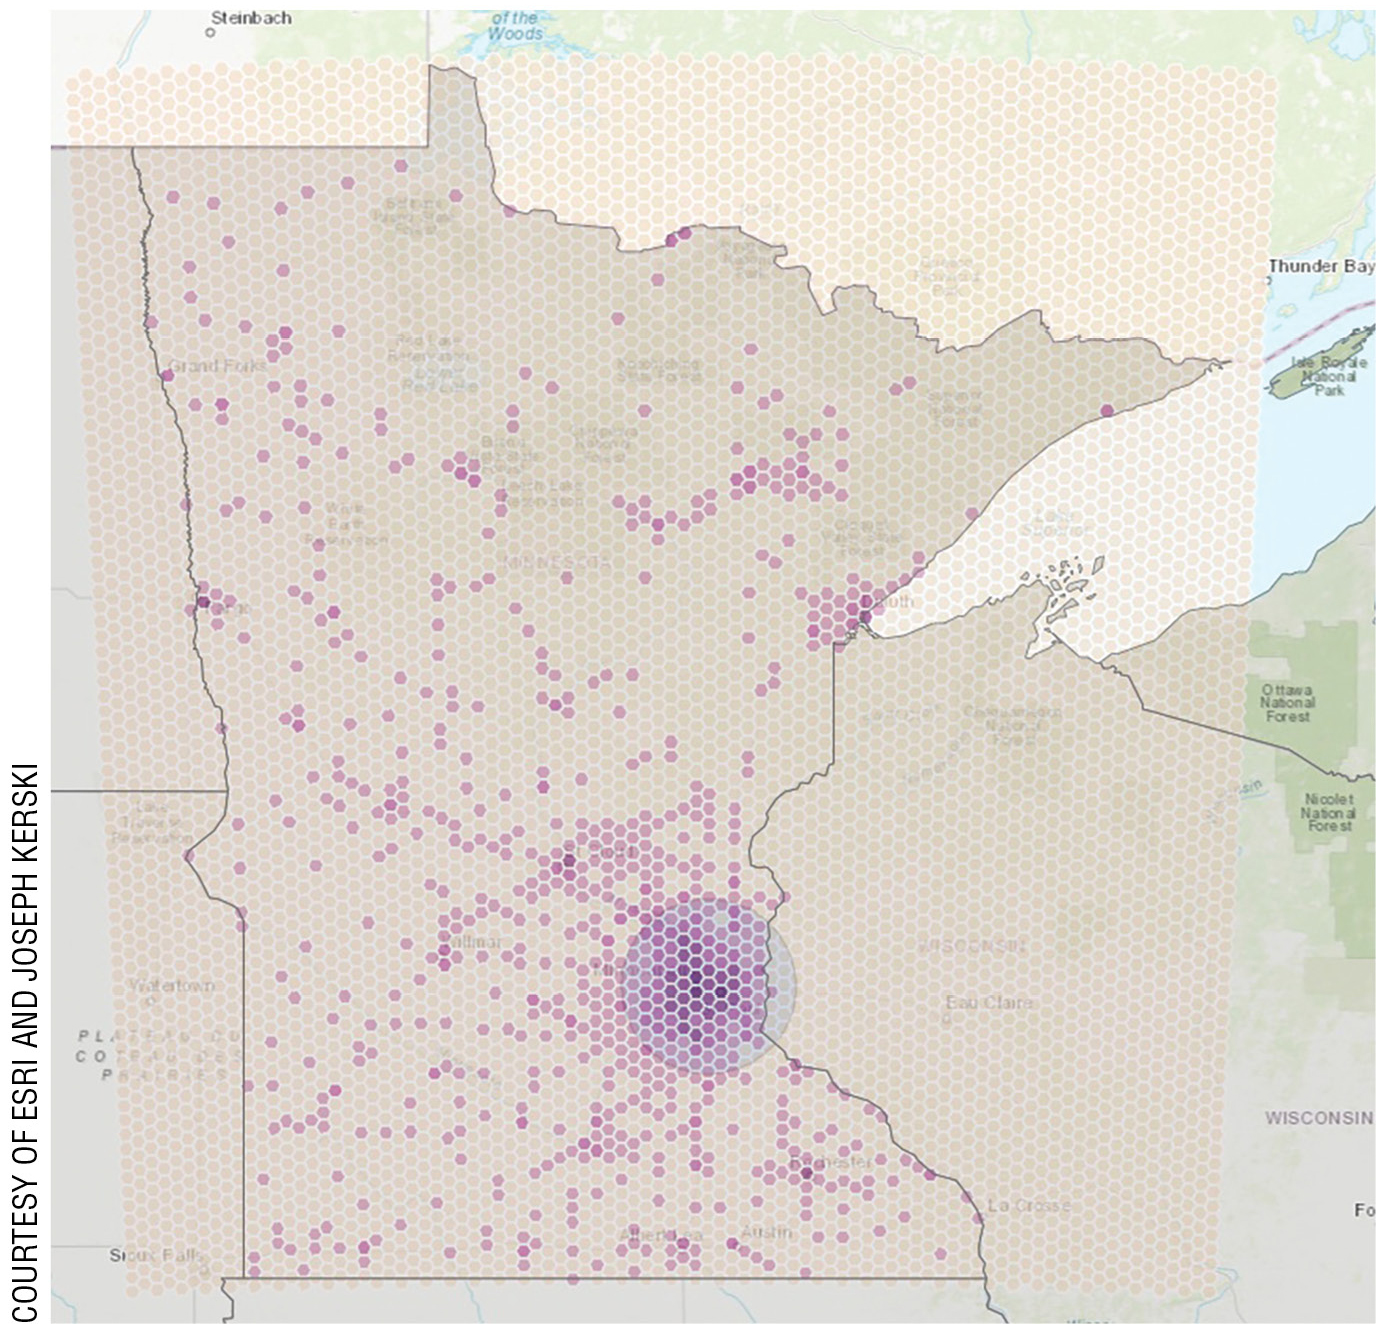 ESRI StoryMap generated by two middle school students showing how many cars are driven each day, with purple-colored hexagons representing a greater number of cars traveling per day within a five-mile radius.